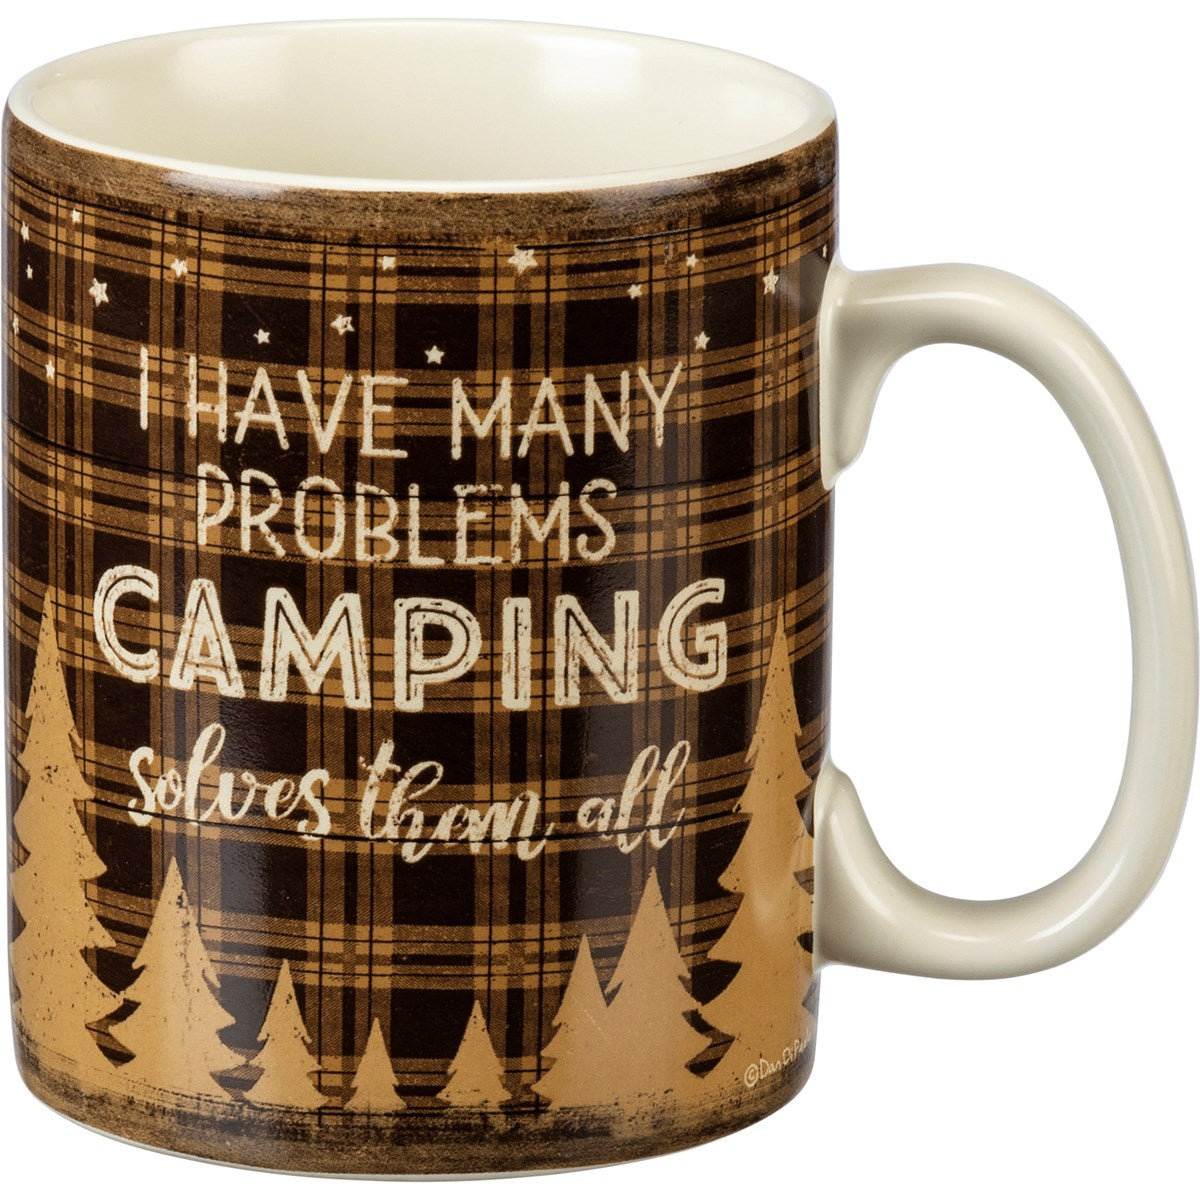 Primitives By Kathy Mug - Many Problems Camping Solves Them All-Primitives by Kathy-Little Giant Kidz